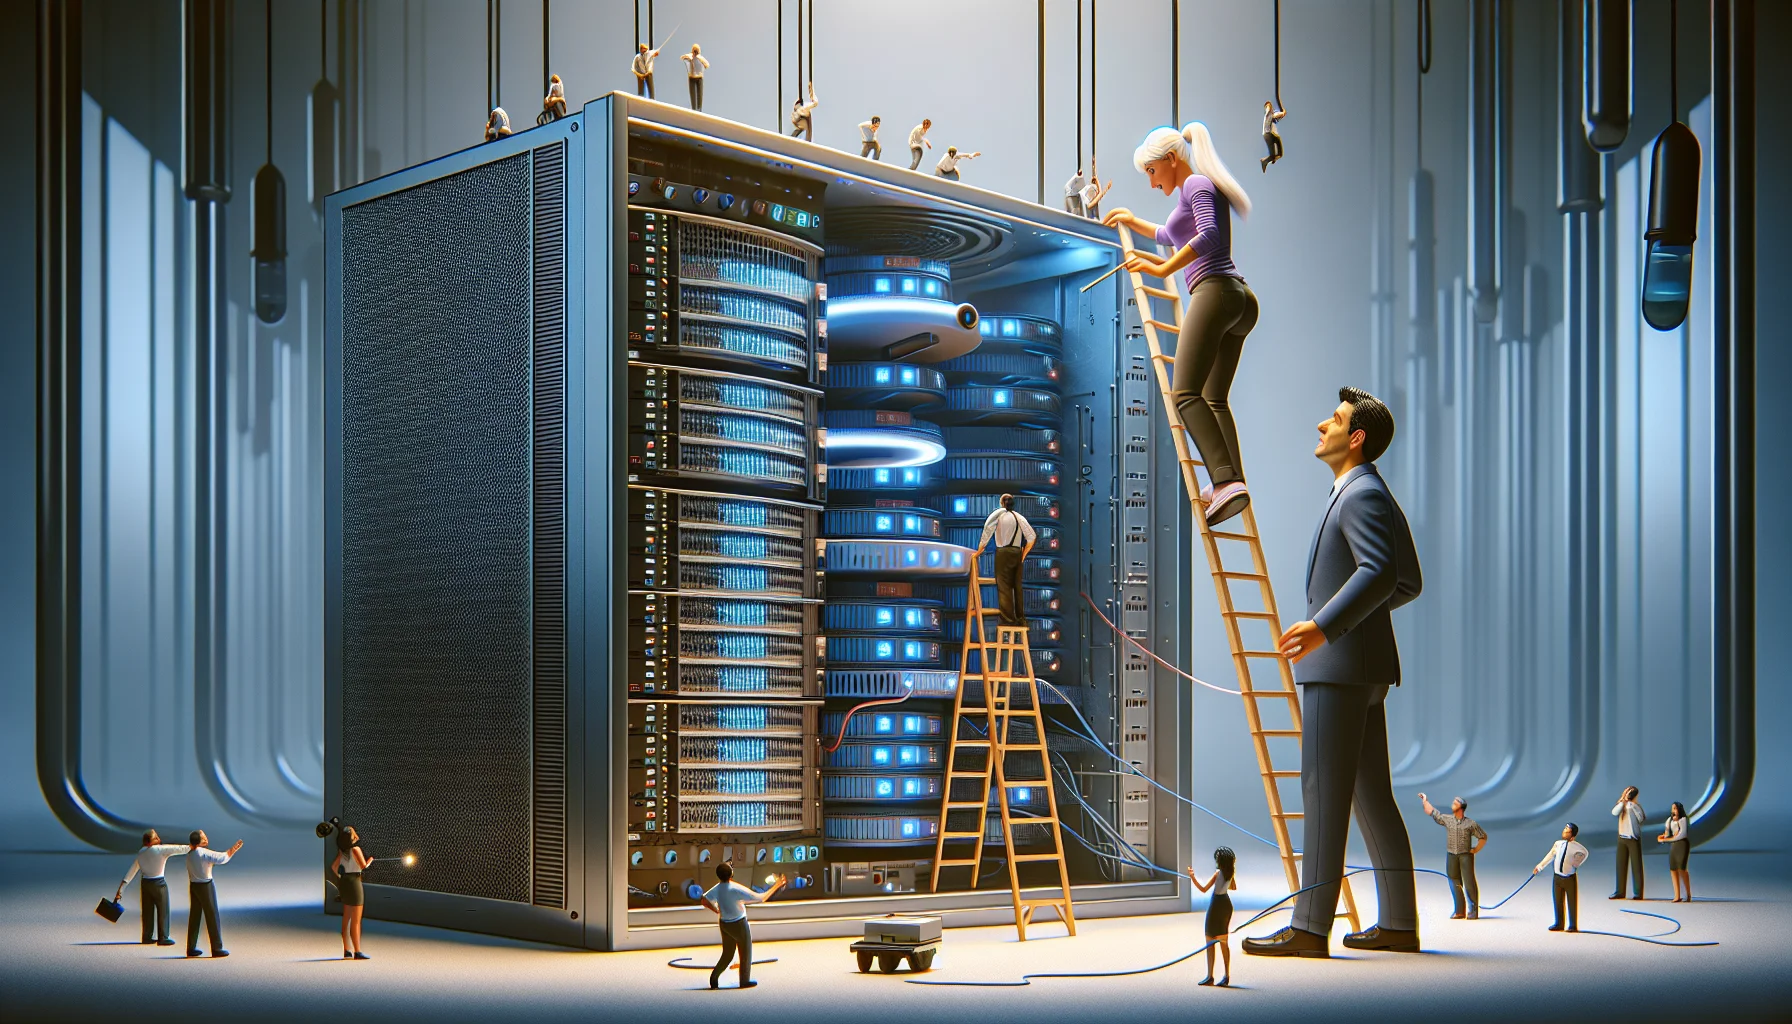 Create a humorous, realistic image of a South Asian female, and a Hispanic male IT professional, in a web hosting scenario. They are working together to install a metaphorical, oversized 'cPanel', visually represented as a large, shiny, digital panel with glowing buttons and dials. The hosting server is depicted as a towering, shiny metallic structure, teetering slightly under the weight of the 'cPanel'. The scenario includes tiny virtual people climbing the server with ropes and pulleys to help with the installation, eliciting a vibe of an adventurous installation process.